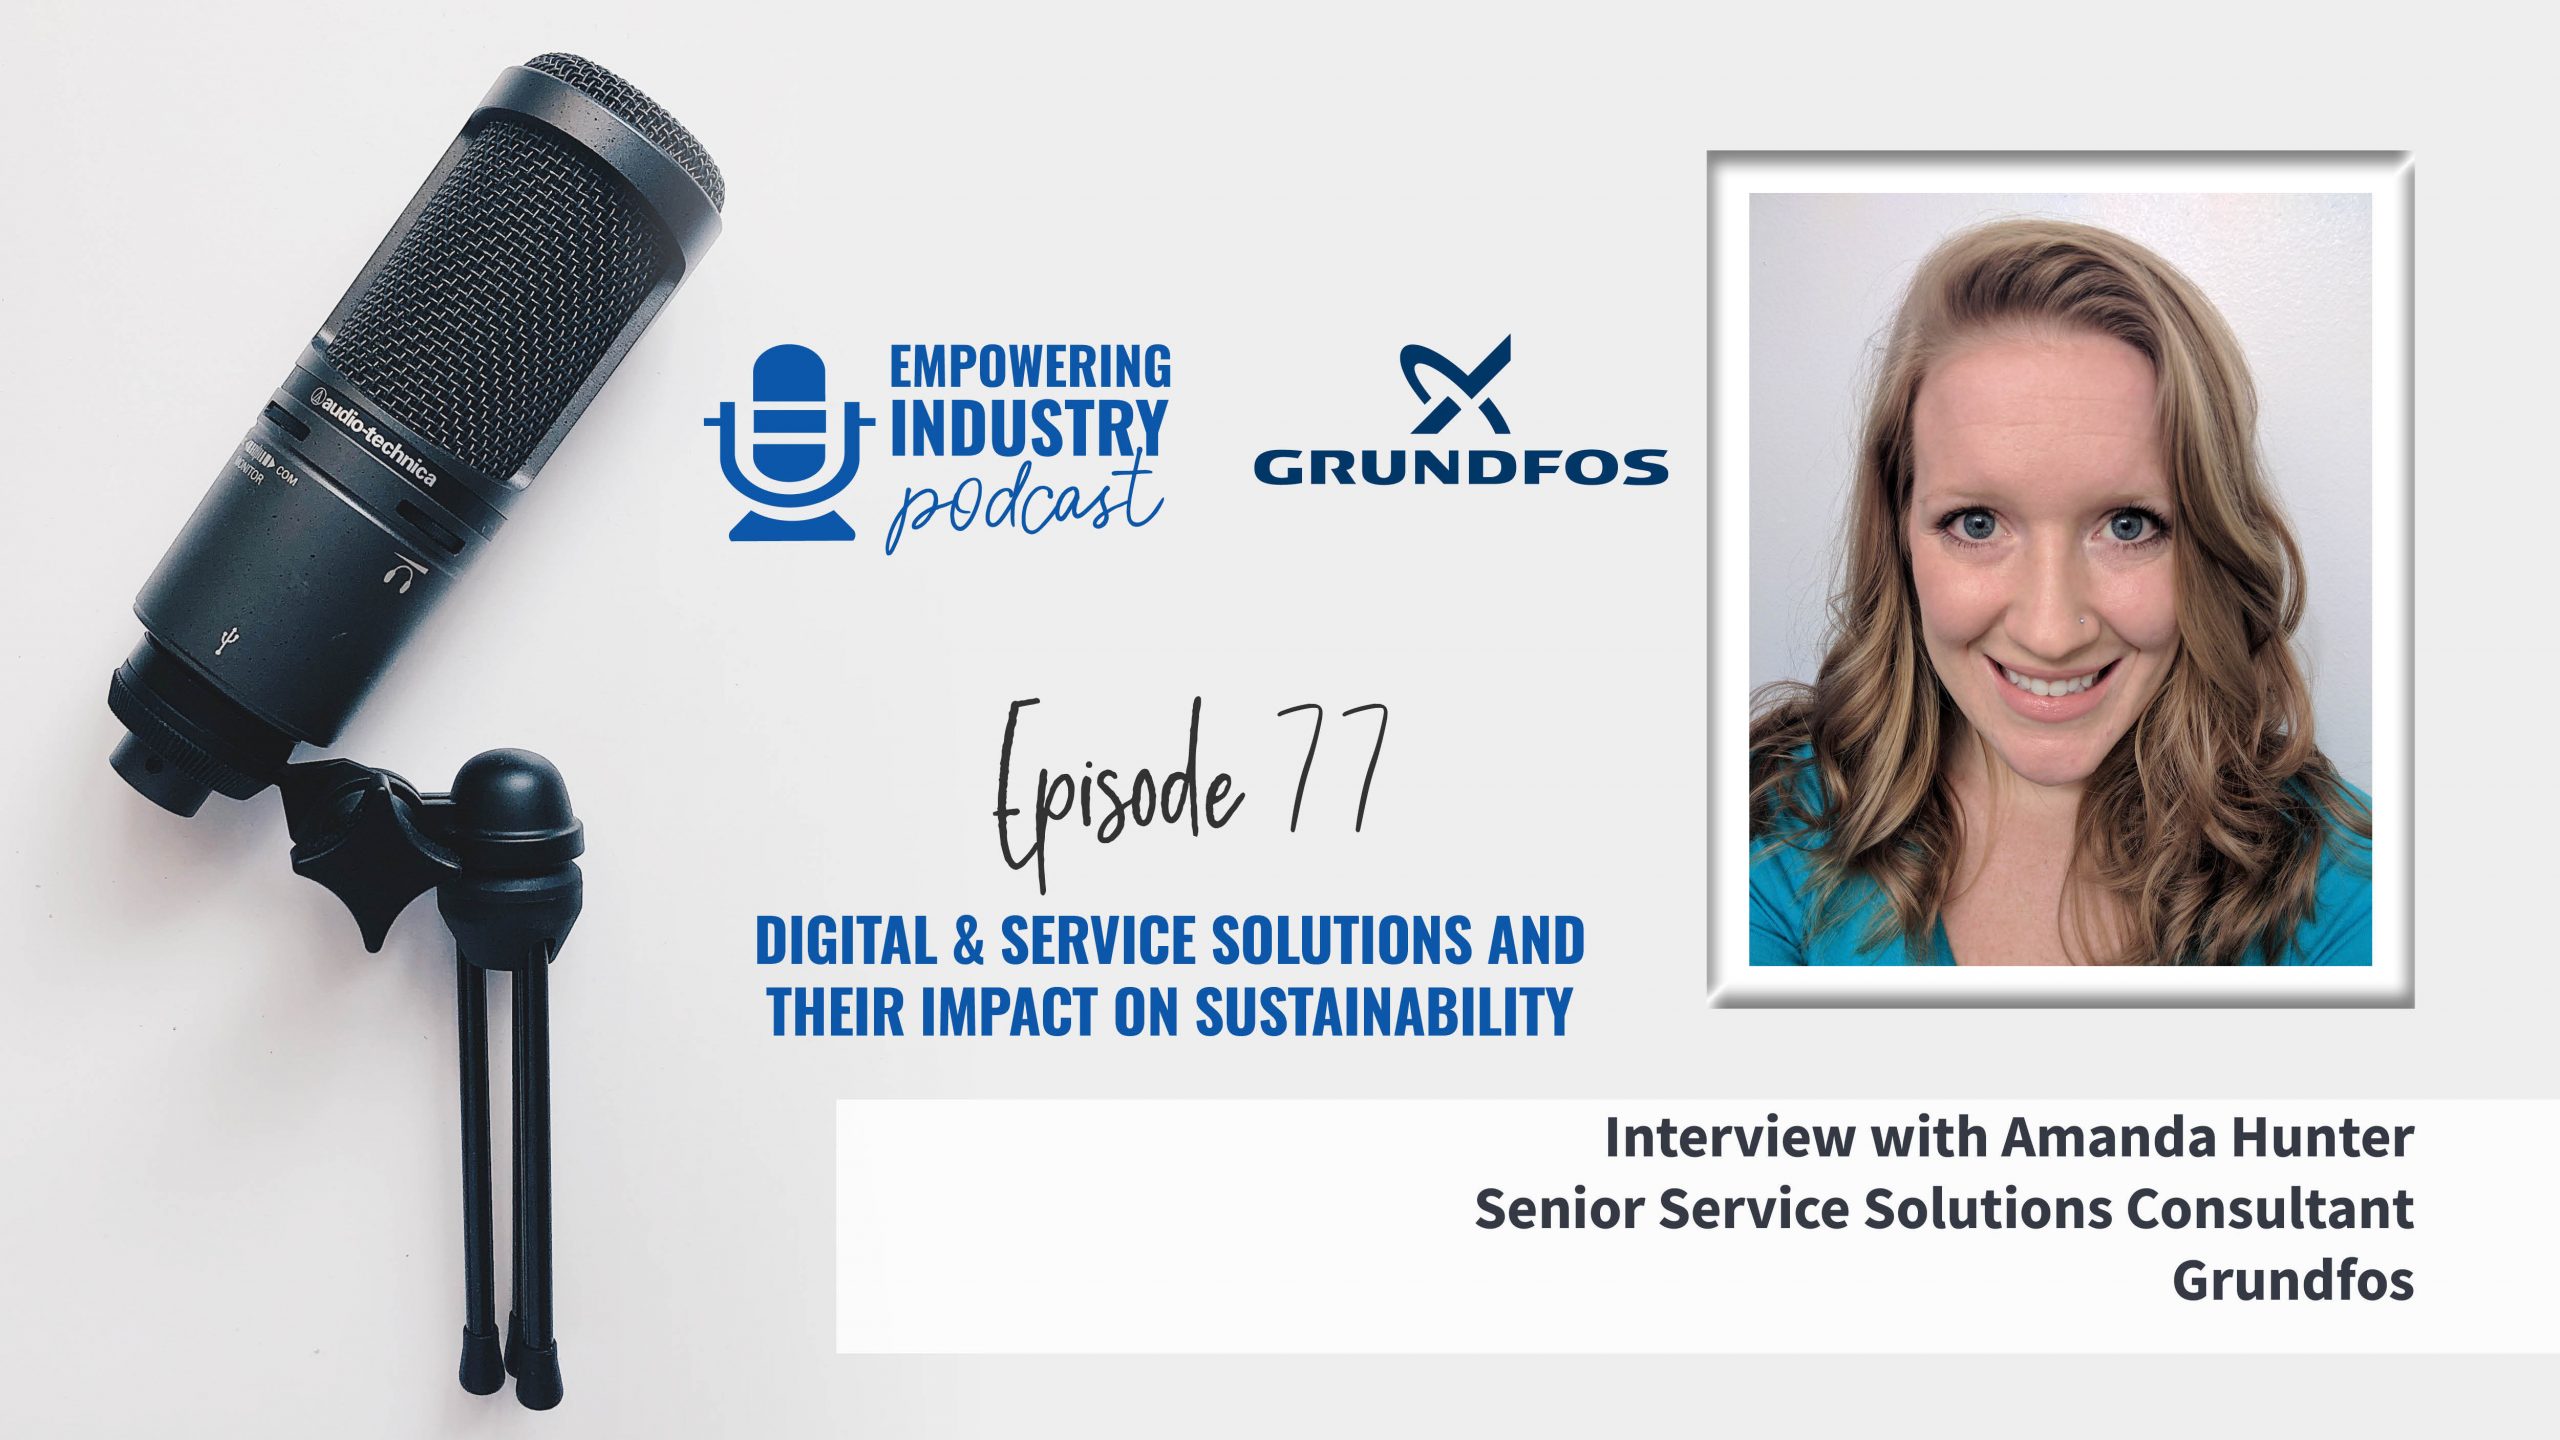 Digital & Service Solutions and their Impact on Sustainability With Amanda Hunter